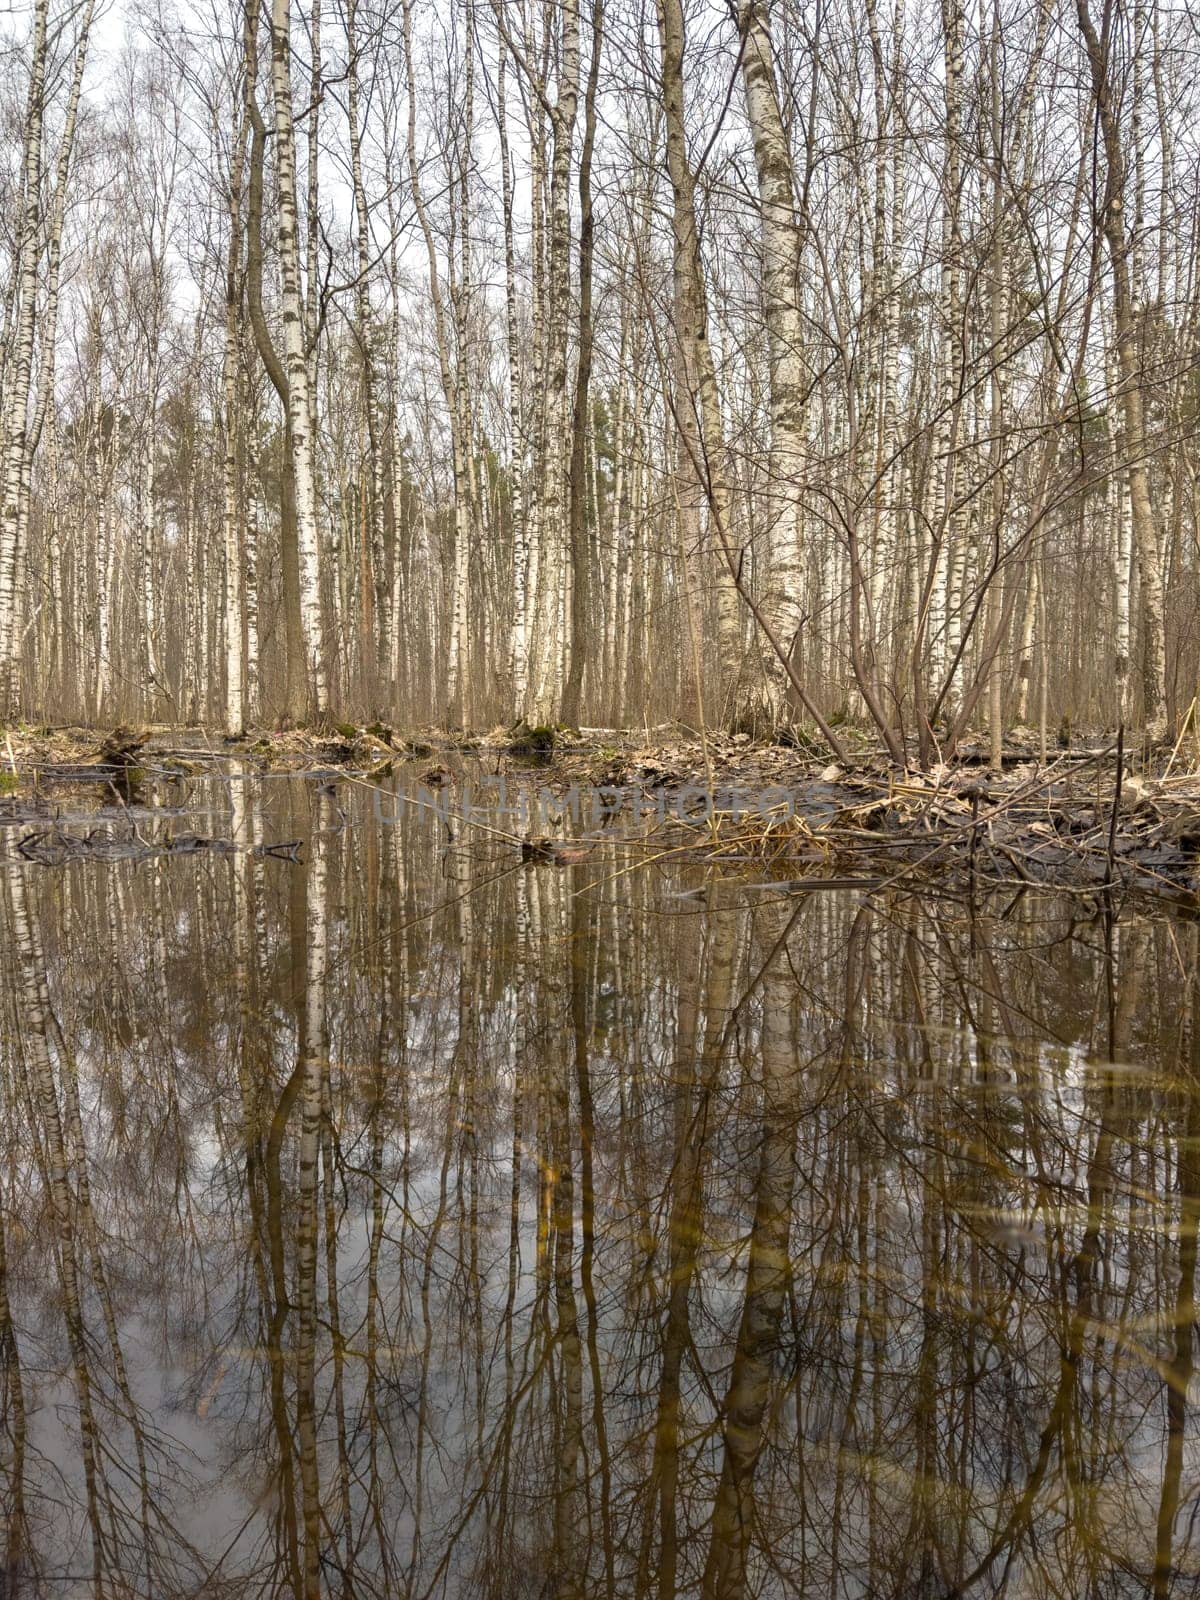 the reflection of trees on the water in the pool in park, trees trunks in water. High quality photo